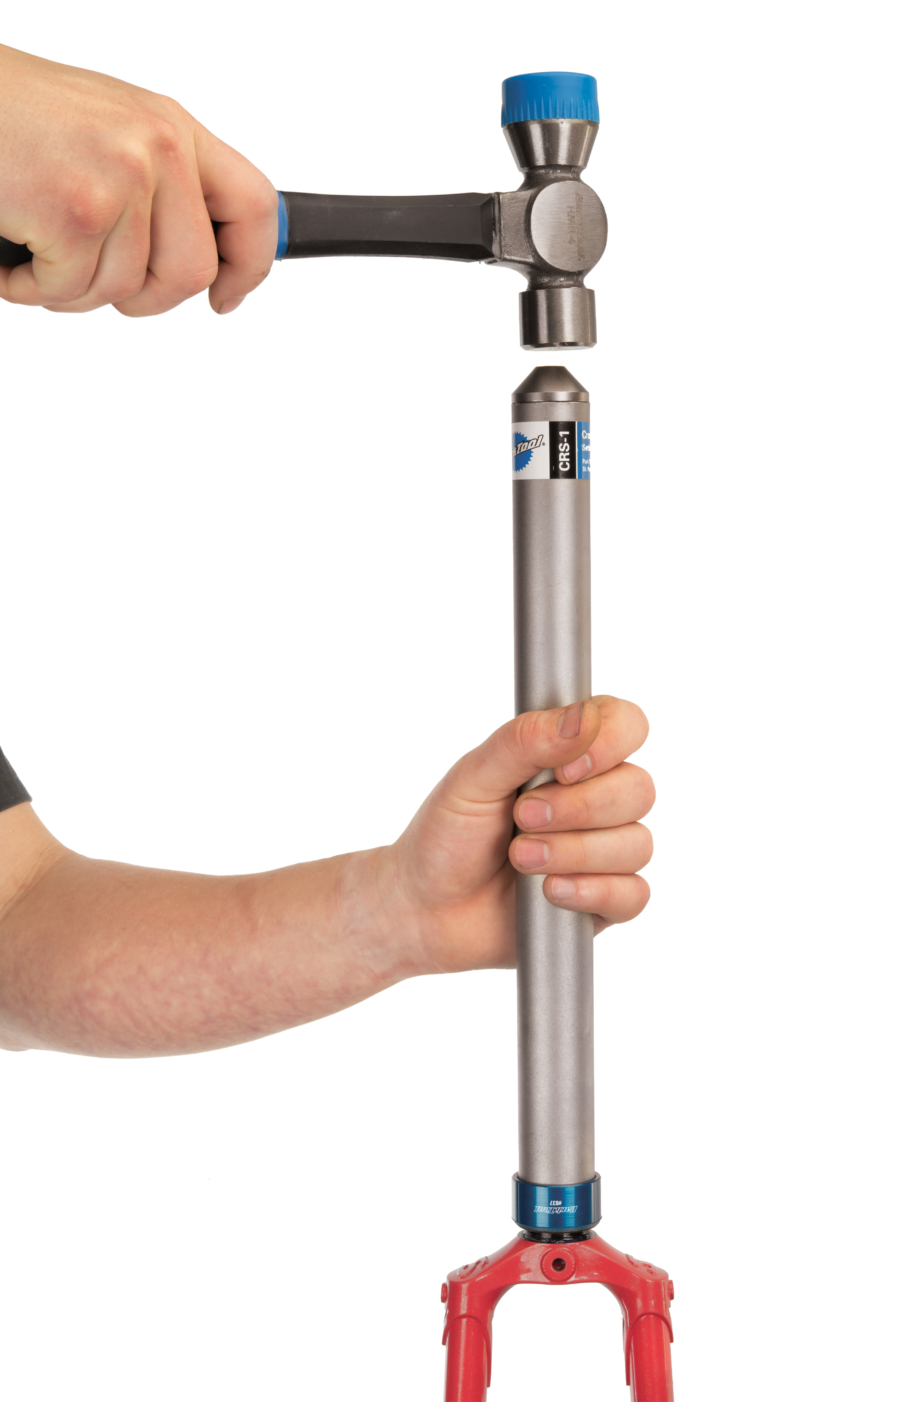 The Park Tool CRS-1 Crown Race Setting System — Oversized installing crown race on 1-1/8" steering tube, enlarged